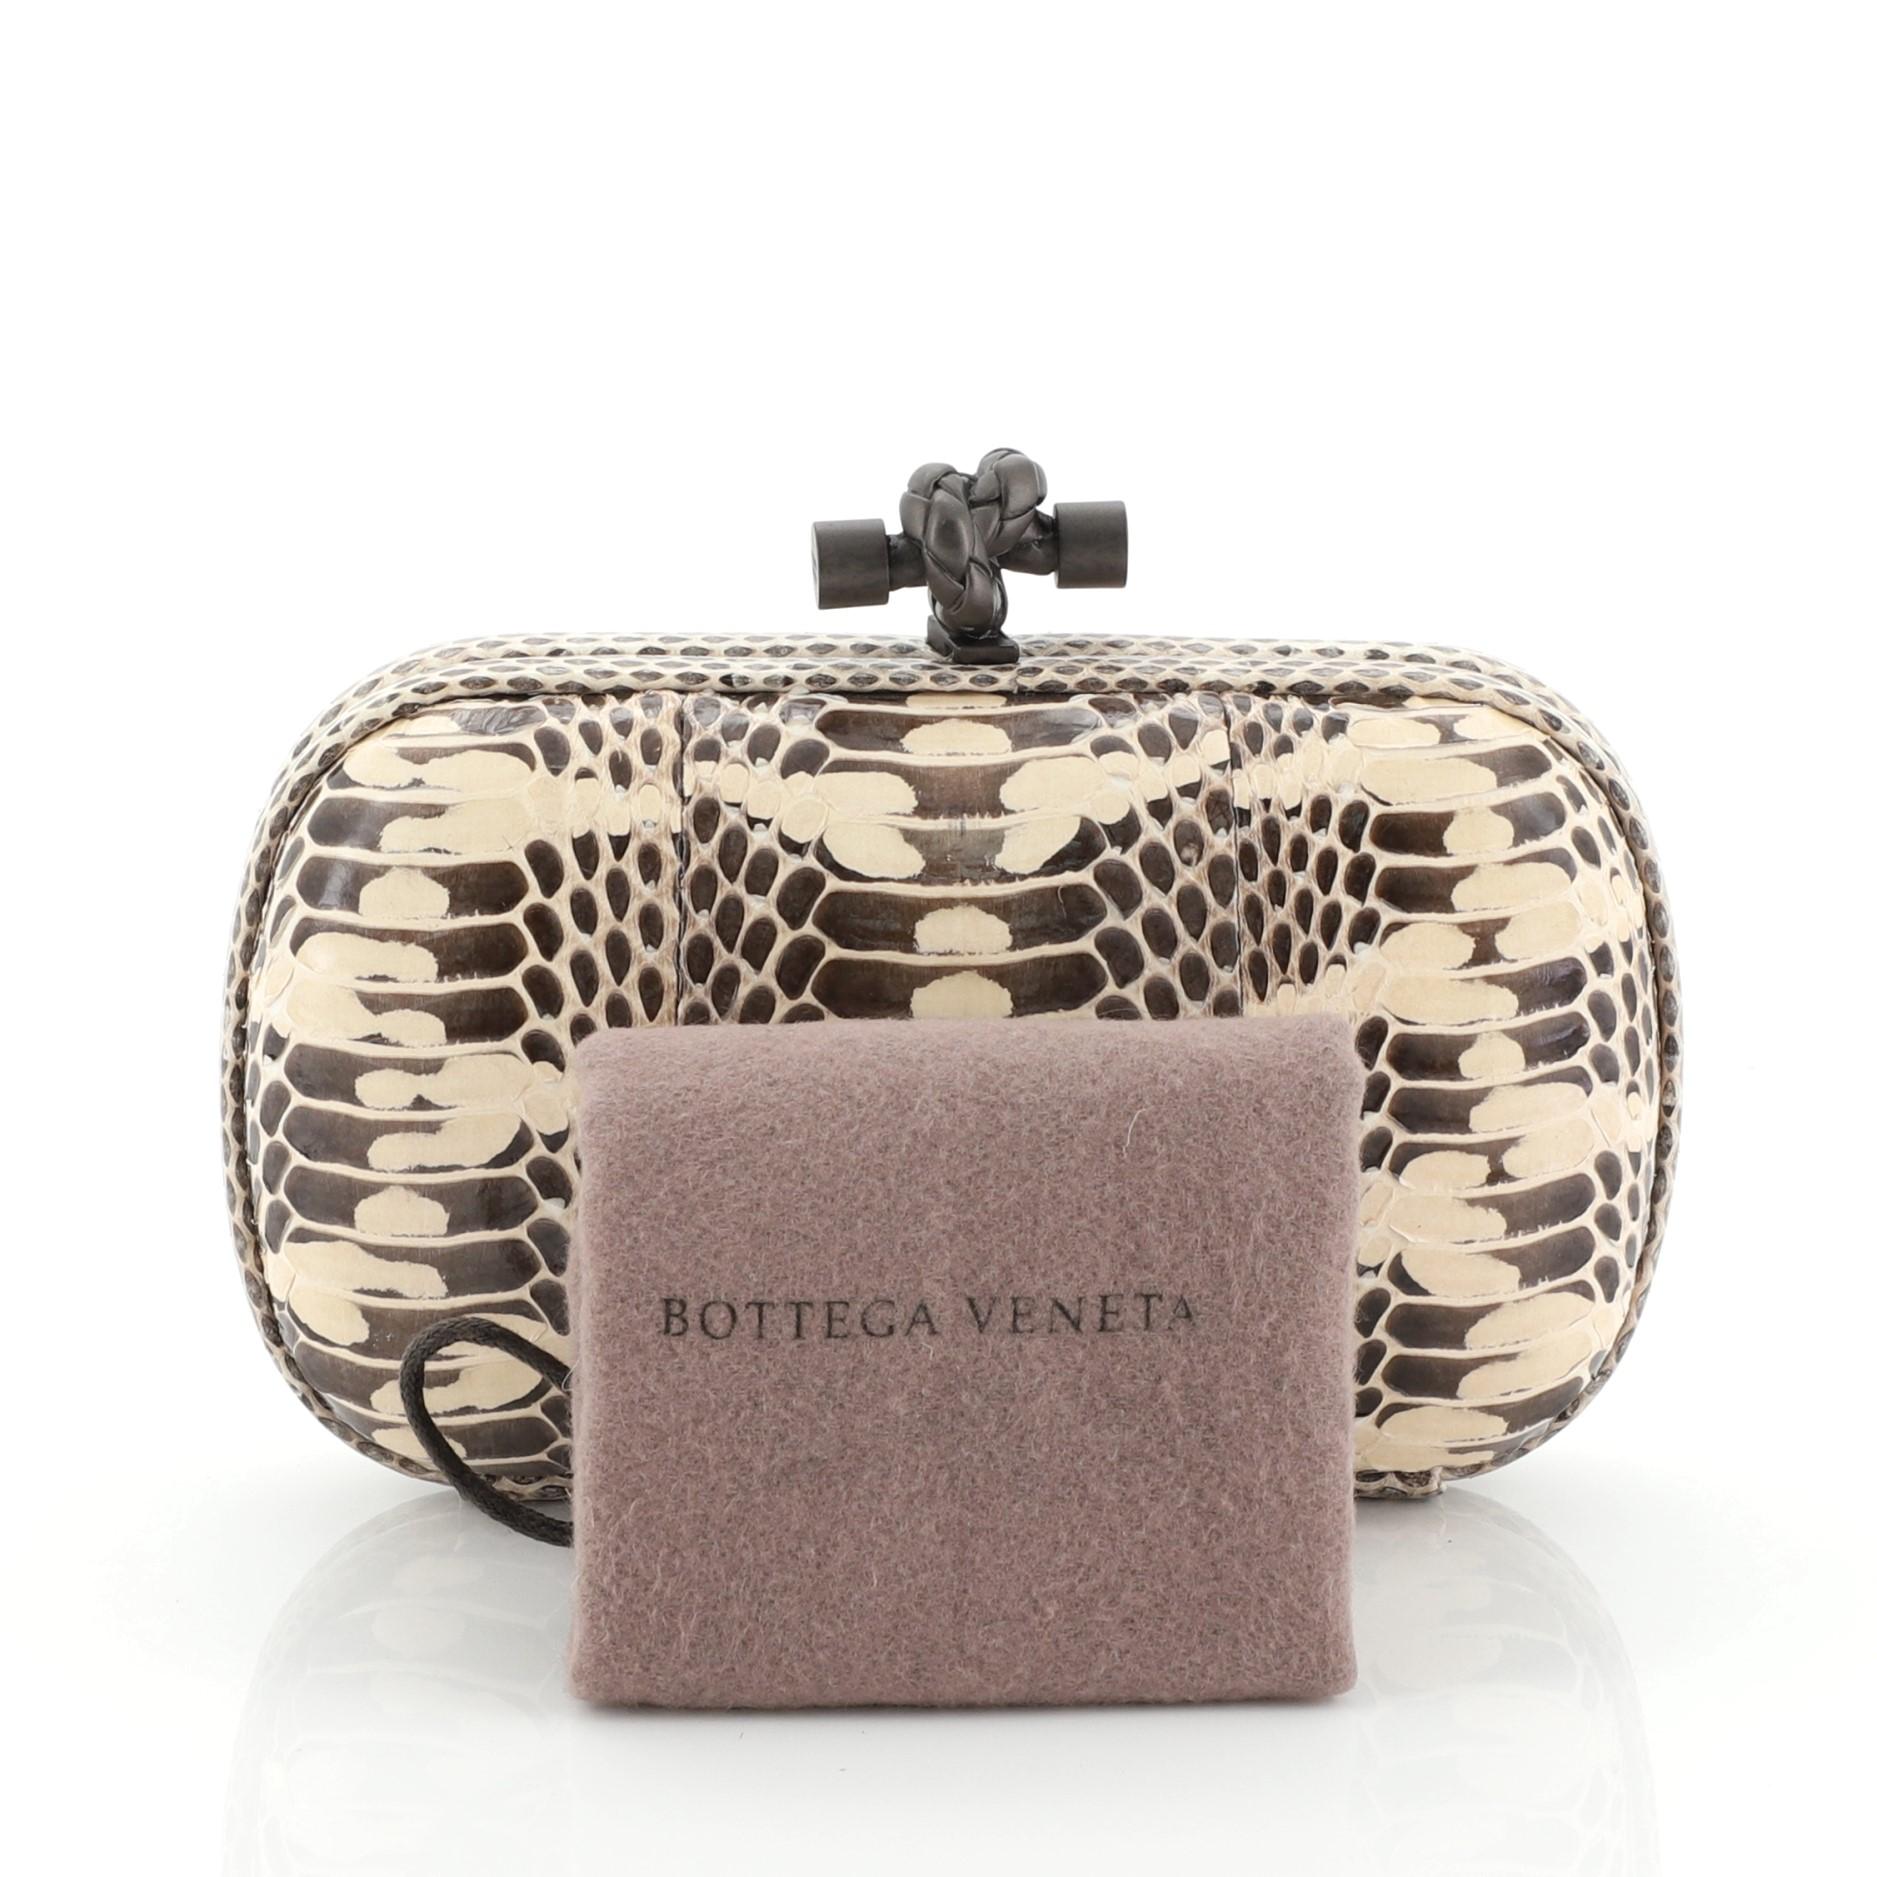 This Bottega Veneta Box Knot Clutch Python Small, crafted from genuine multicolour python features python frame trims and matte gunmetal-tone hardware. Its top knot clasp closure opens to a neutral leather interior. This item can only be shipped